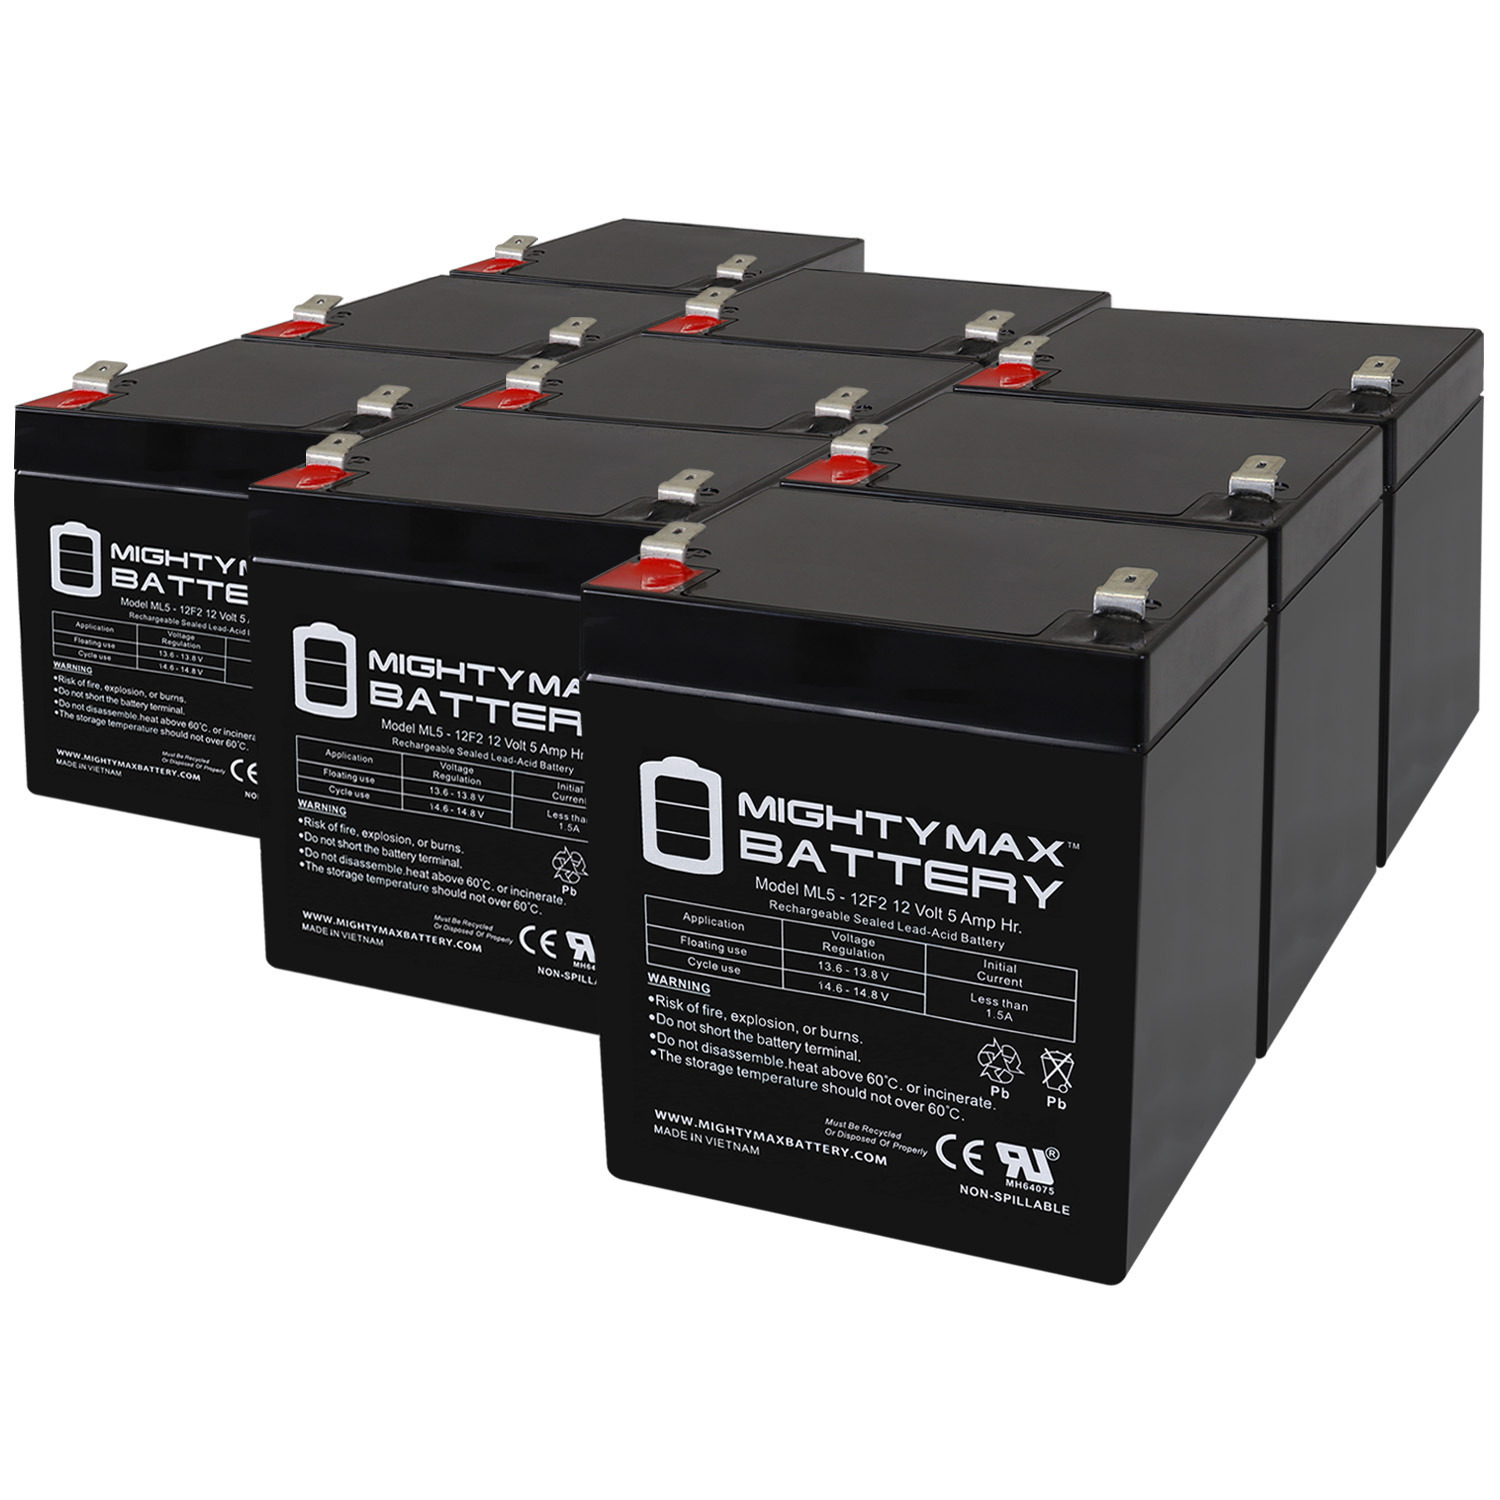 12V 5Ah F2 SLA Replacement Battery for Tripp Lite SU6000RT4UHVPM - 9 Pack